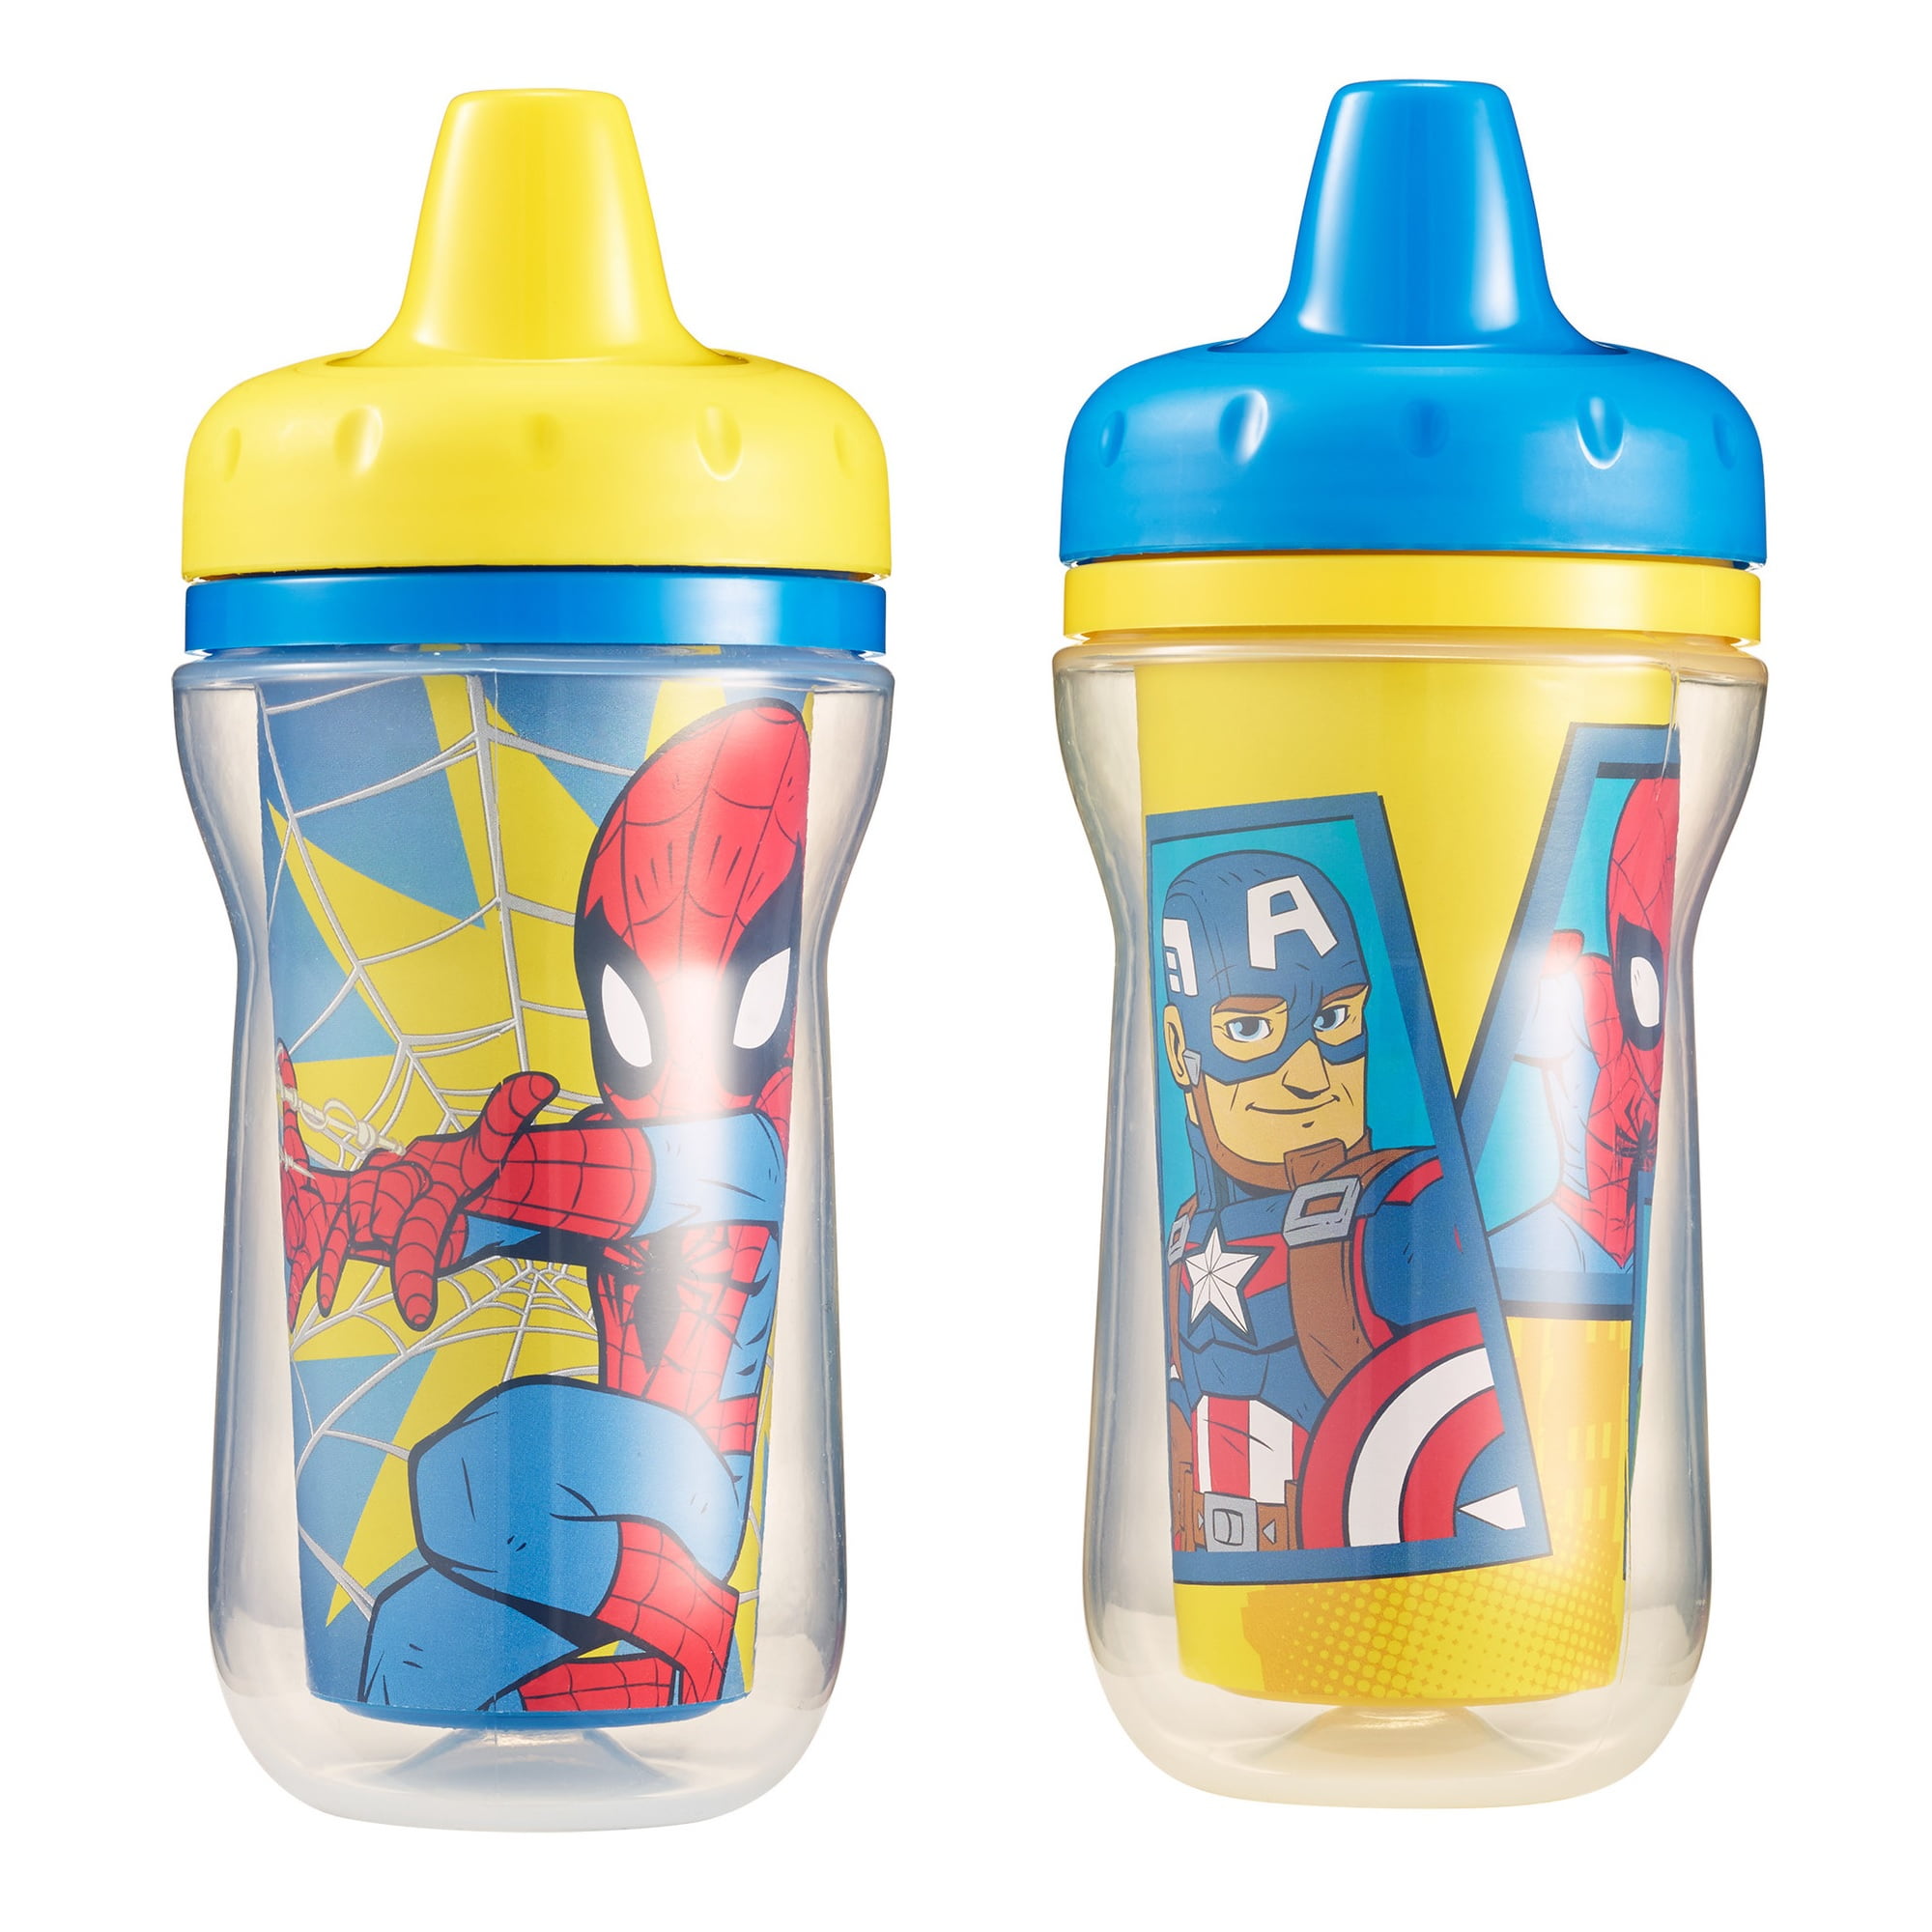 SUPERMAMA Sippy Cups for 1+ Year Old with Spout & Straw(9 Oz